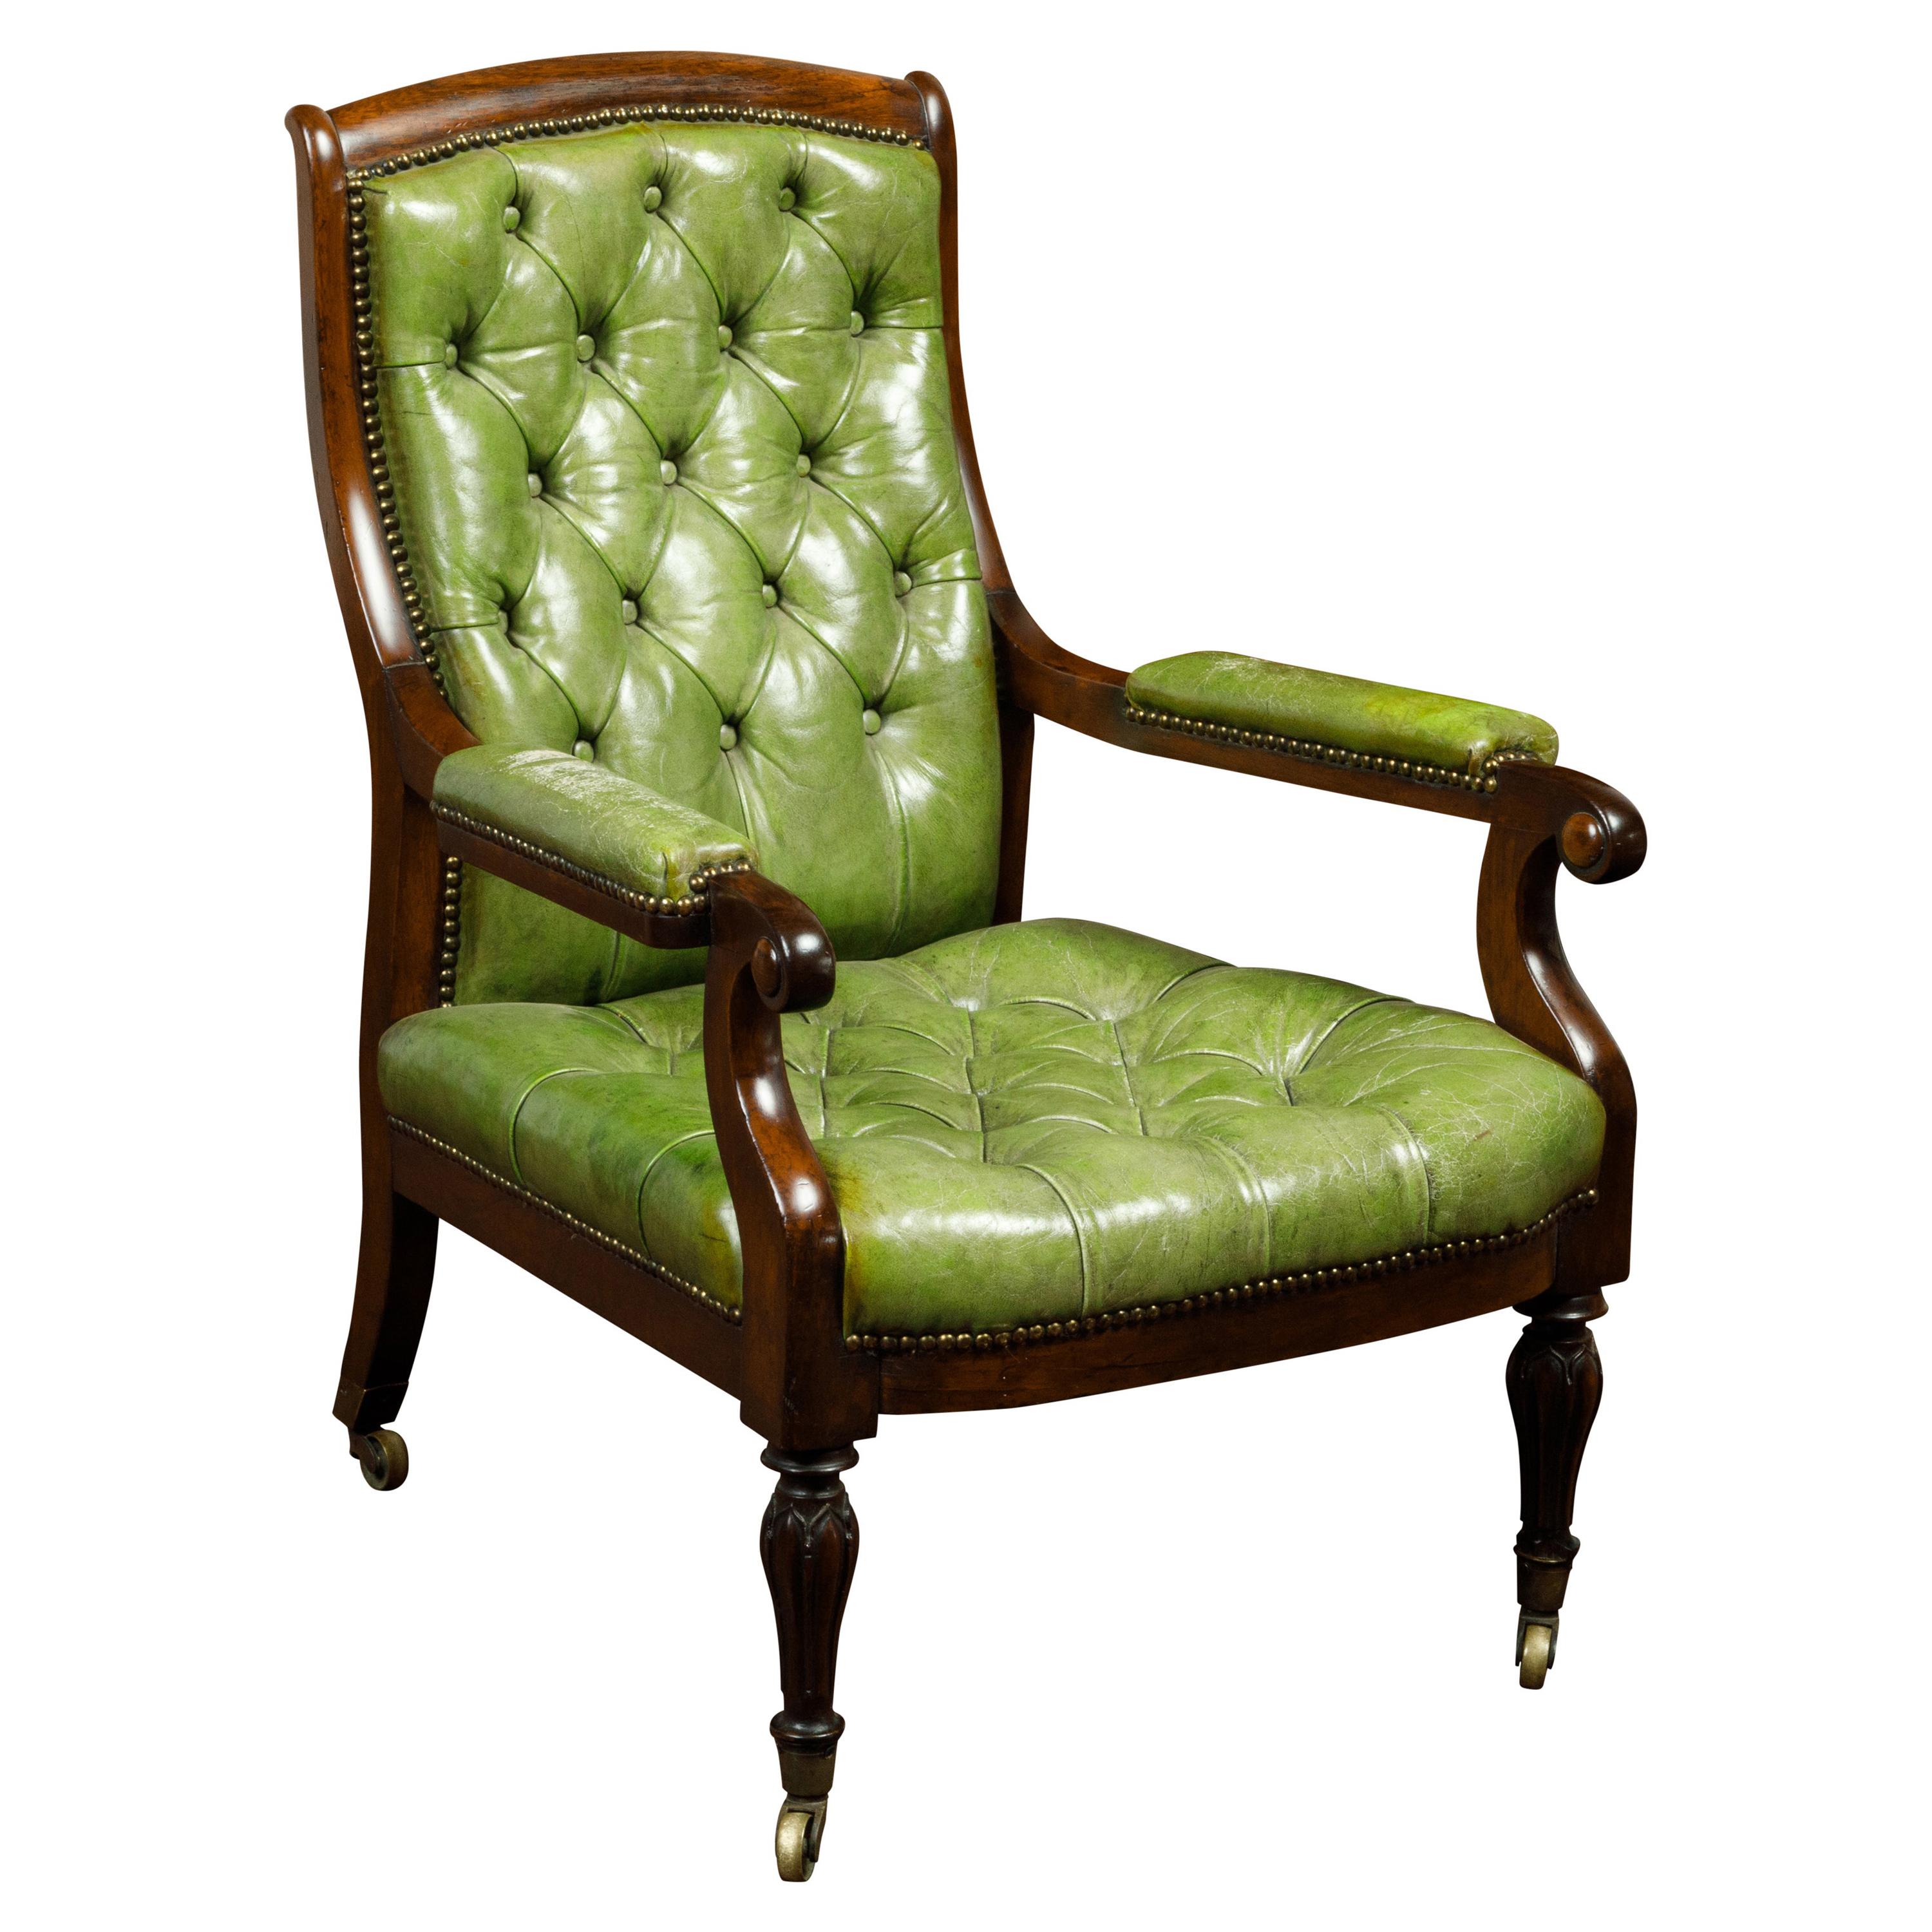 English 1830s Regency Green Tufted Leather Club Chair with Scrolling Arms